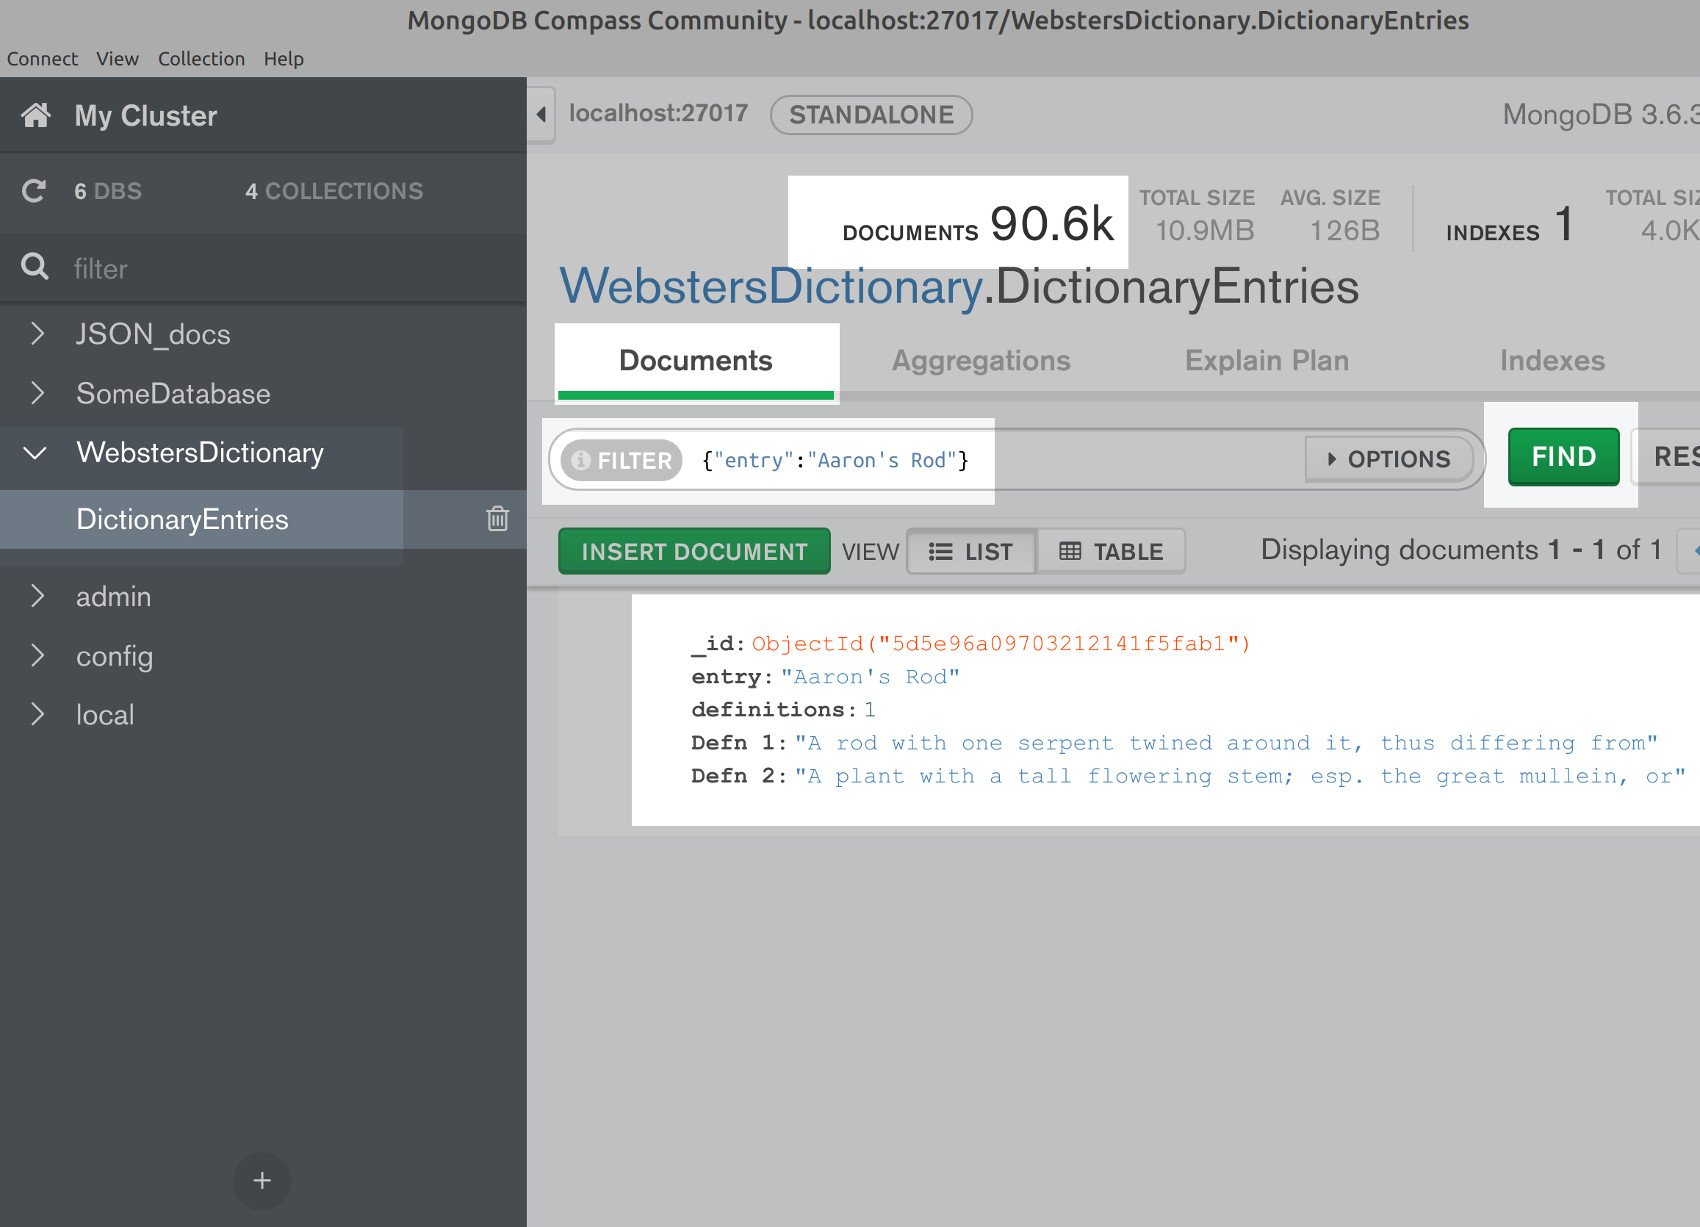 Screenshot of MongoDB Compass GUI filtering documents parsed from entries in Webster's dictionary